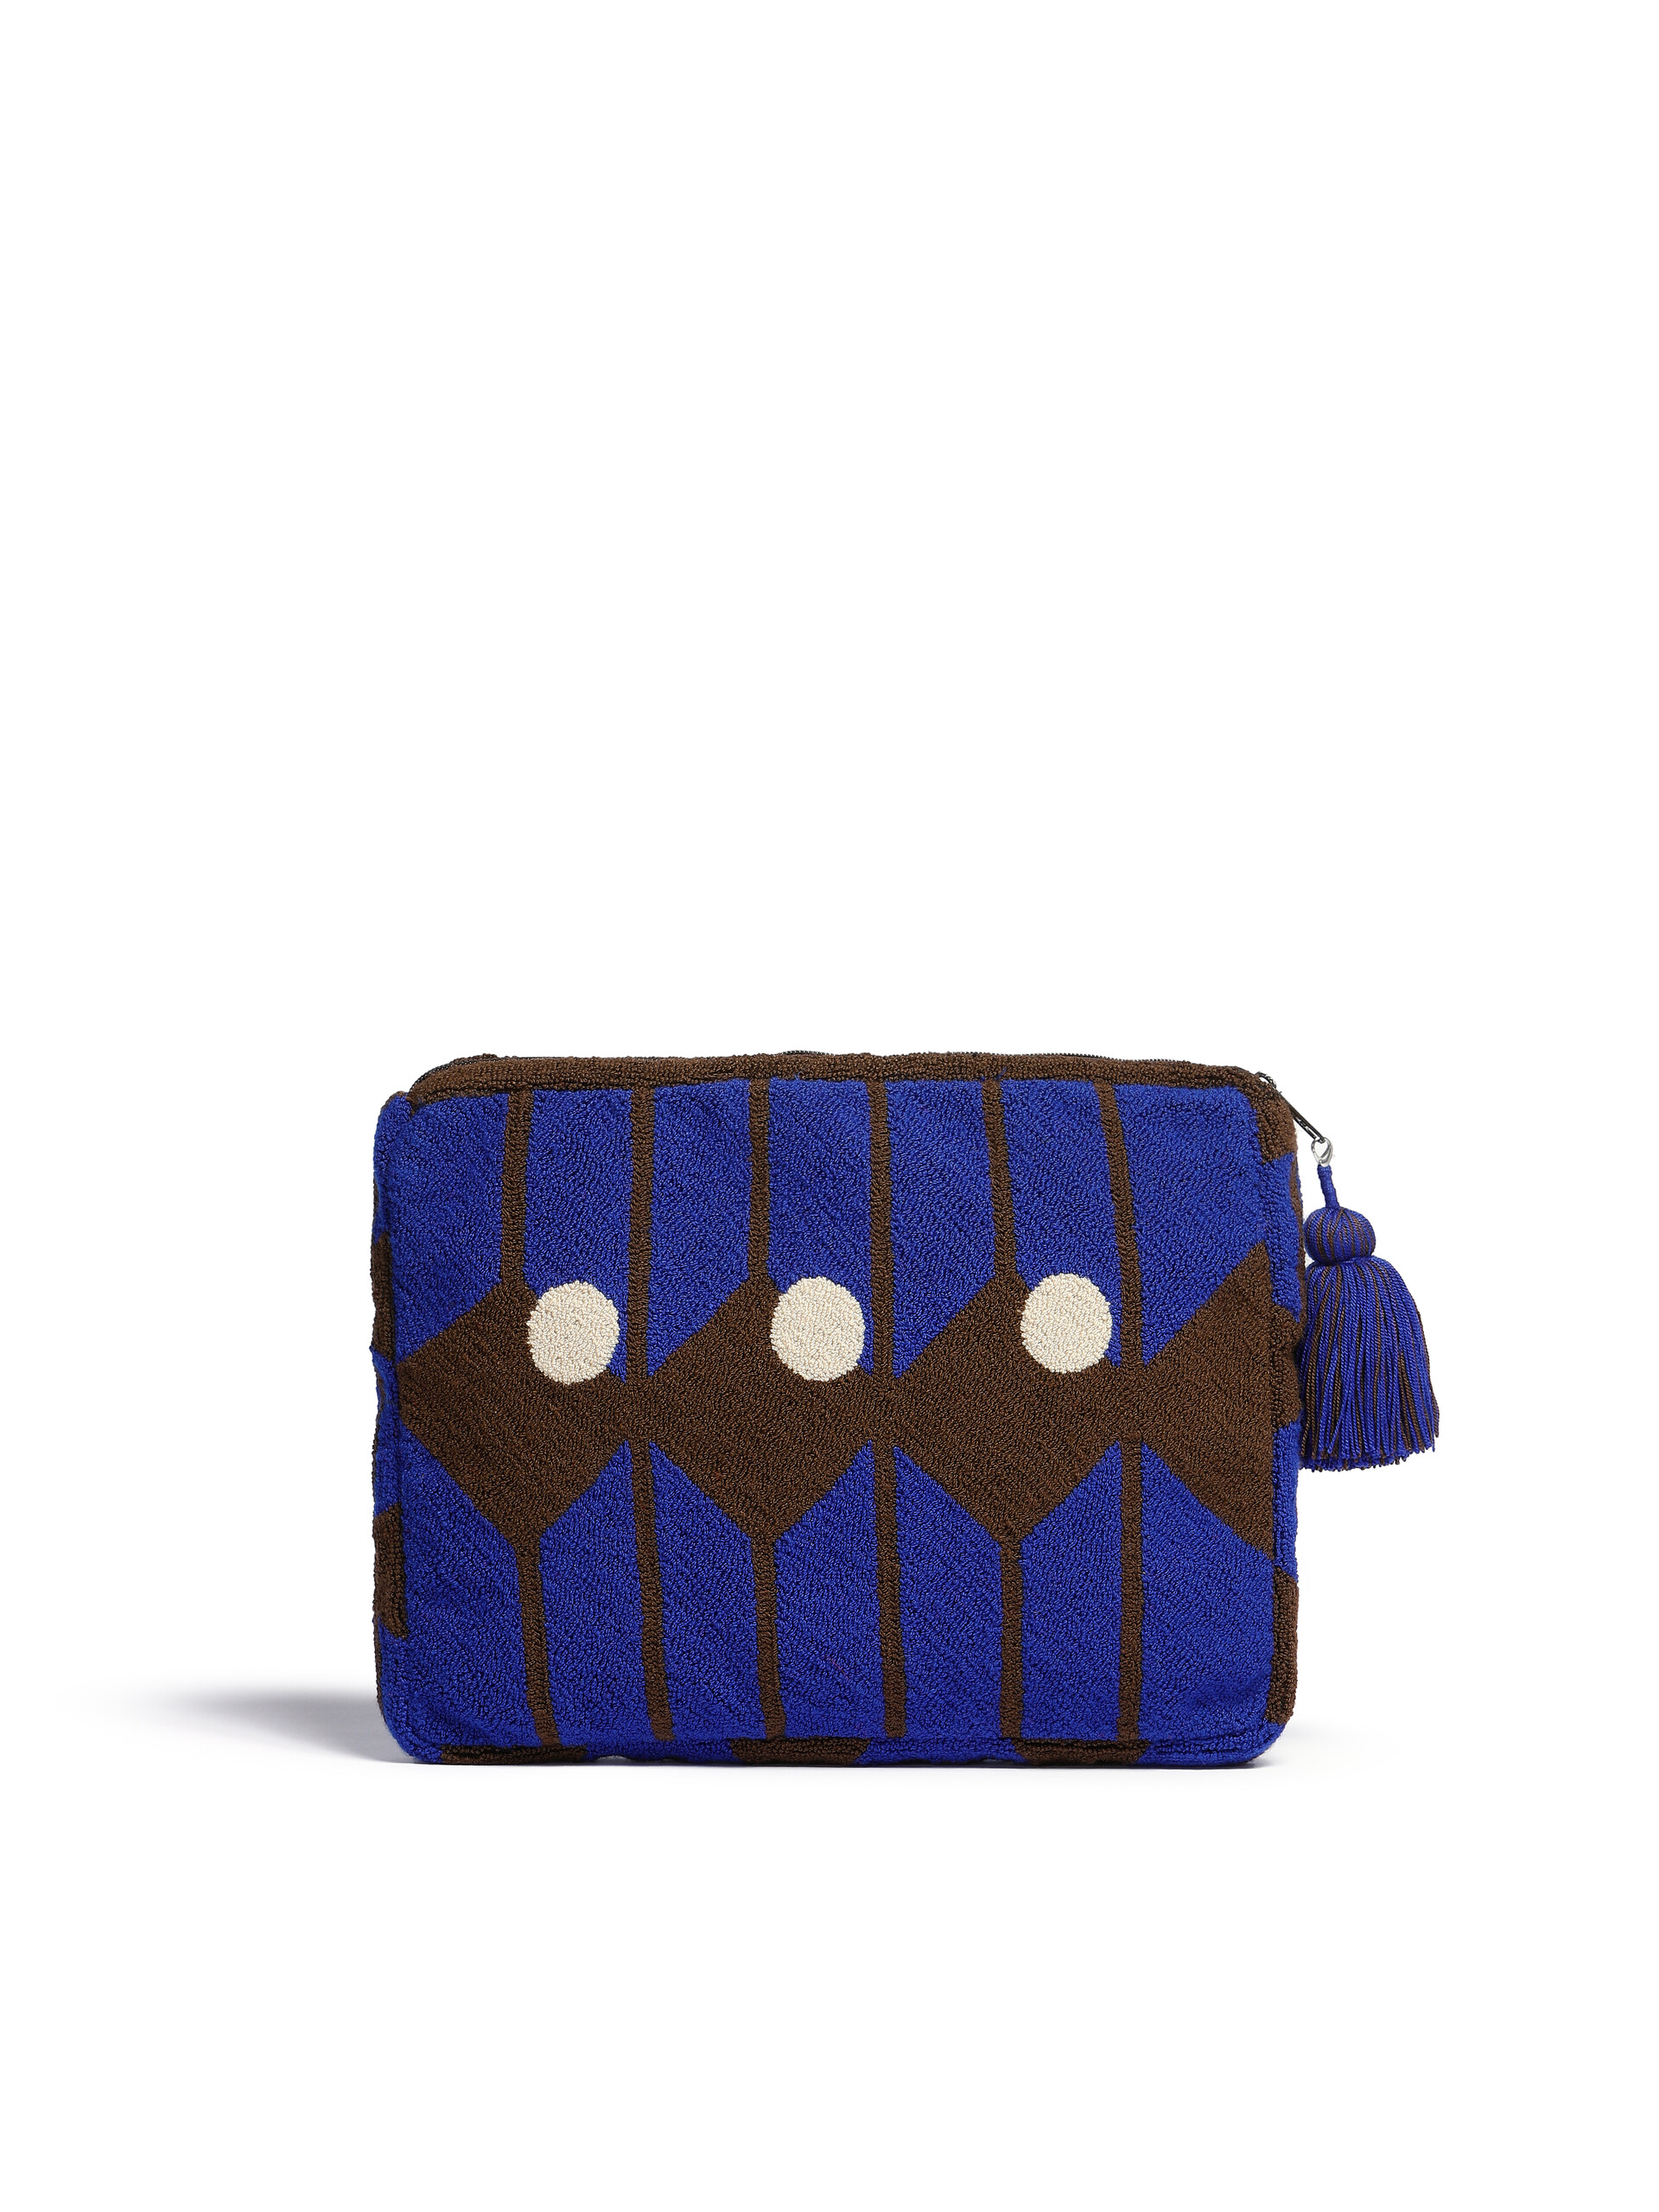 Blue and brown Marni Market wool laptop case - Bags - Image 3